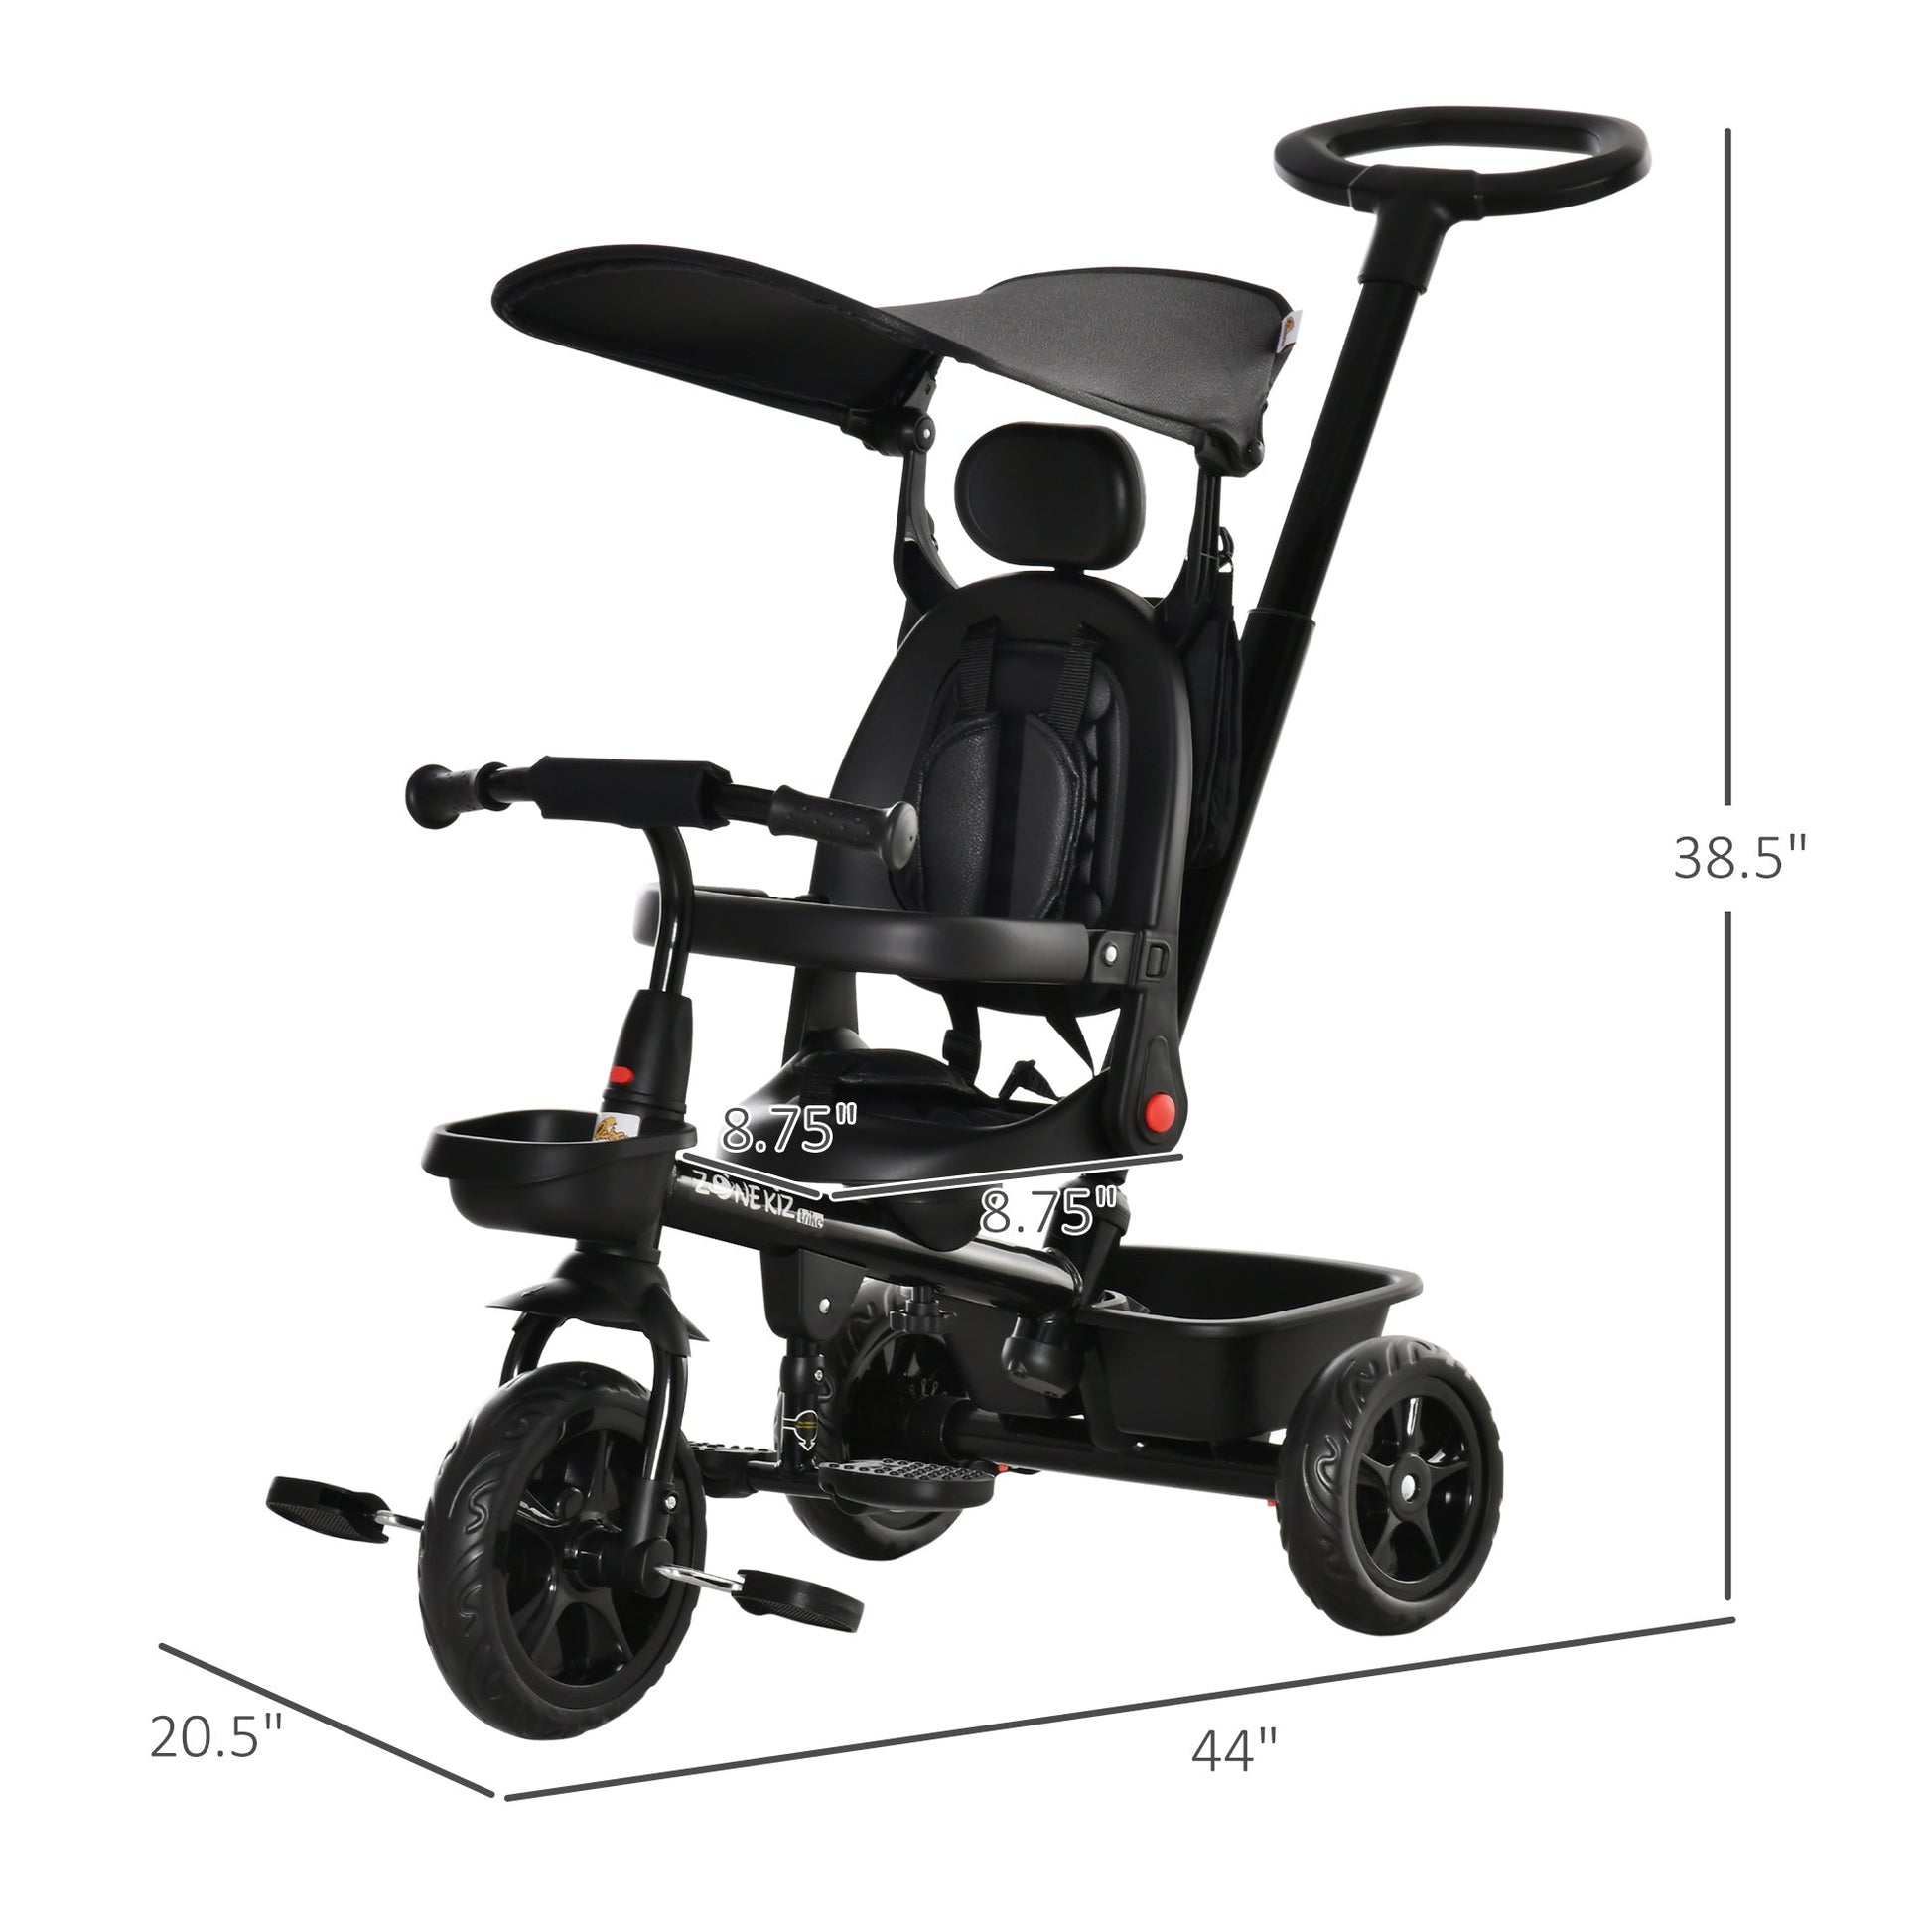 Kids Tricycle 4 In 1 Trike with Reversible Angle Adjustable Seat Removable Handle Canopy Handrail Belt Storage Footrest Brake Clutch for 1-5 Years Old Black at Gallery Canada